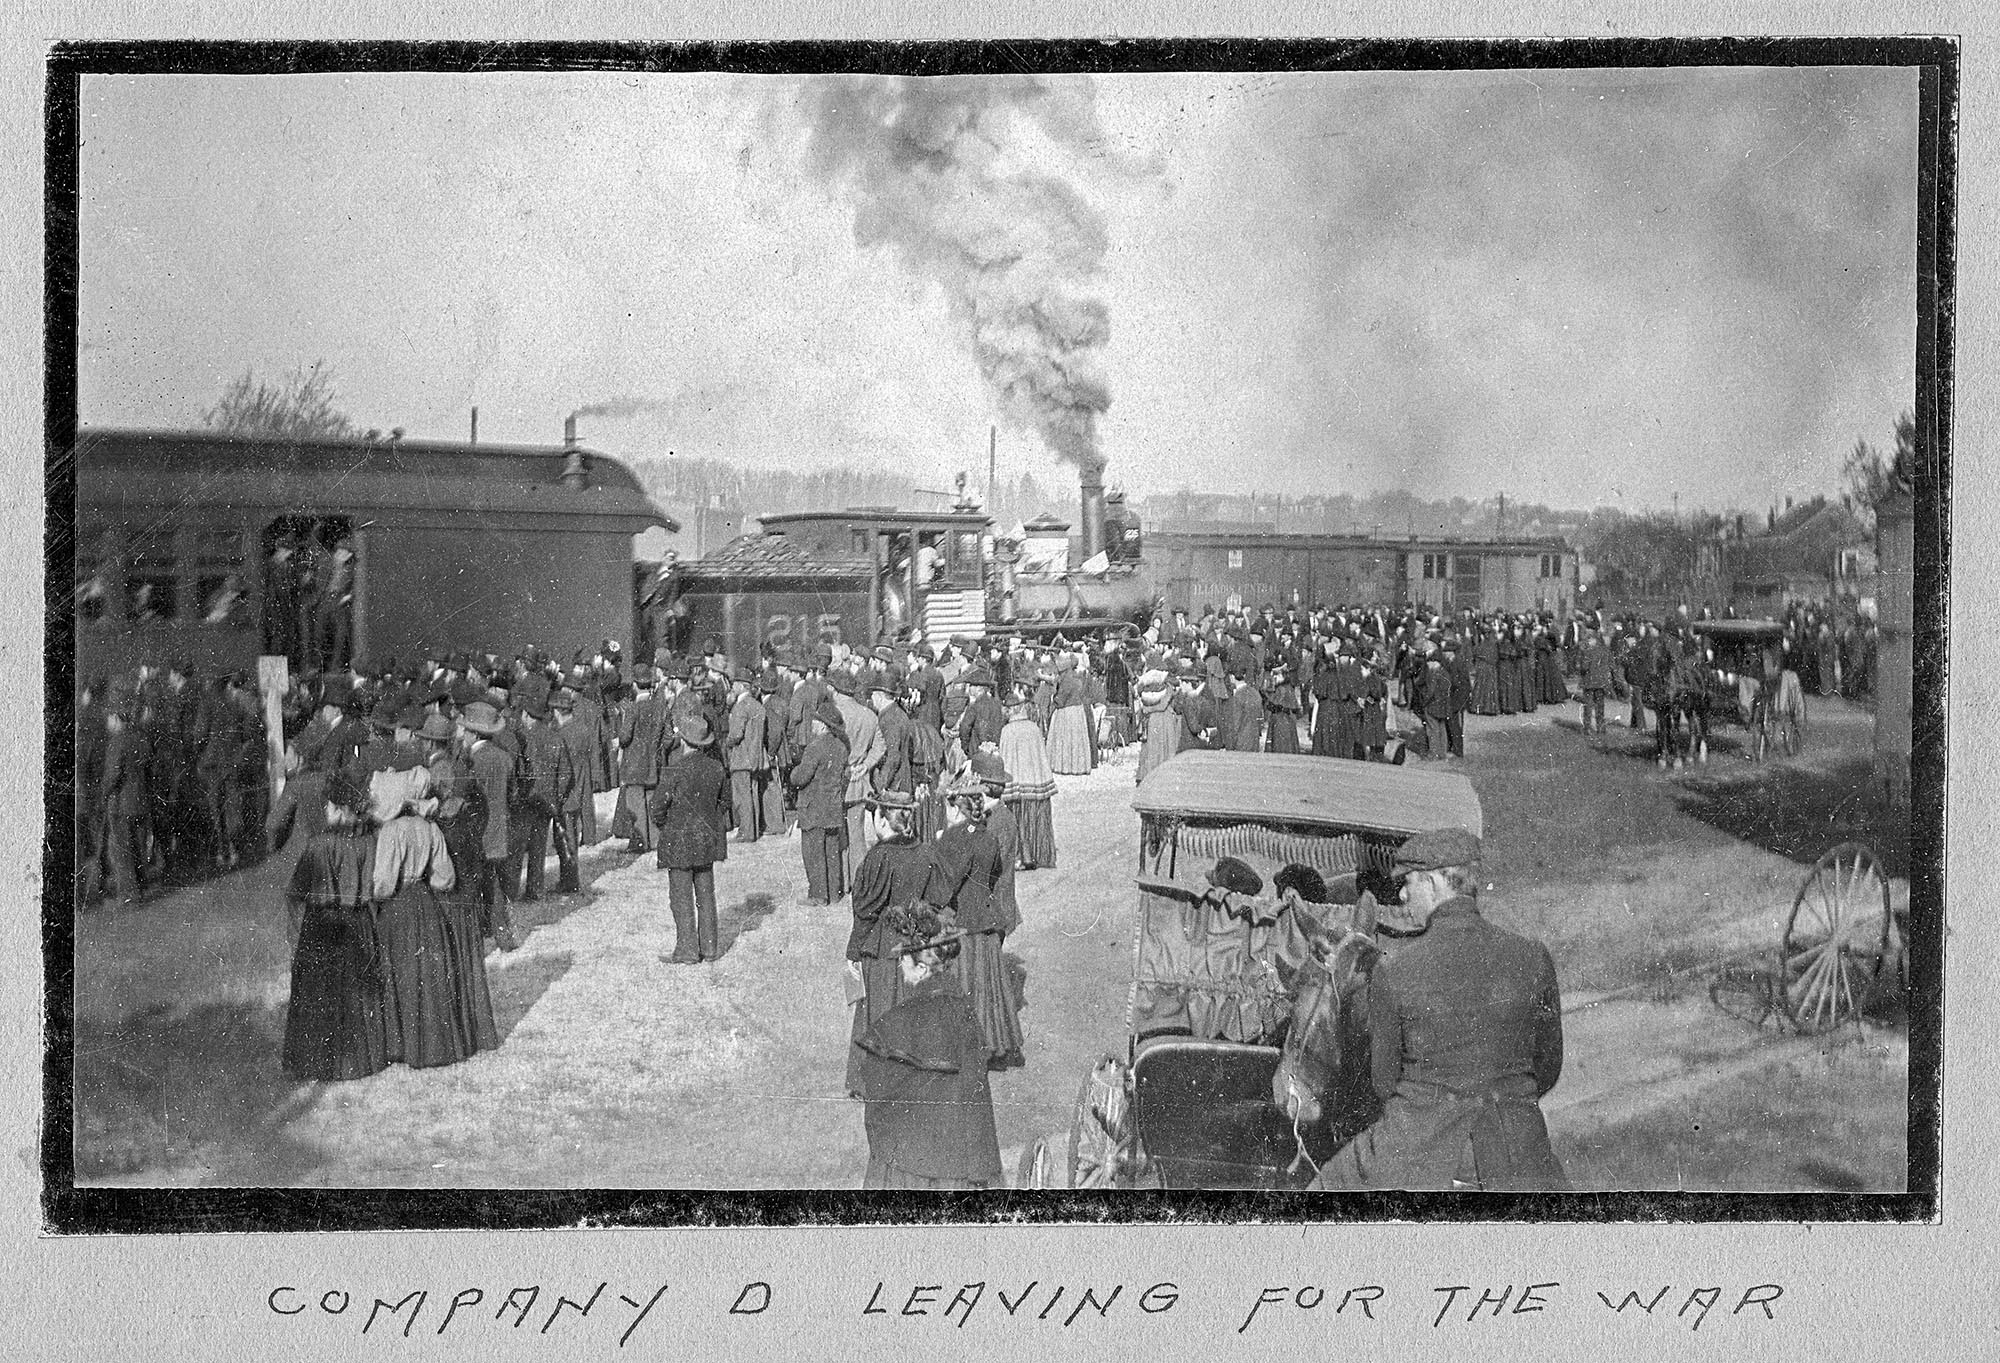 Company D of the 2nd Missouri Volunteer Infantry leaving for the Spanish-American War. Sedalia, Missouri, 1898. 

On April 25, 1898 the United States declared war on Spain following the sinking of the Battleship Maine in Havana harbor on February 15, 1898. The war ended with the signing of the Treaty of Paris on December 10, 1898. As a result Spain lost its control over the remains of its overseas empire -- Cuba, Puerto Rico, the Philippines Islands, Guam, and other islands. The war had cost the United States $250 million and 3,000 lives, of whom, 90% perished from infectious diseases.

Photo taken by Samuel Peake Hyde, b. Feb 17, 1850, St. Francisville, Clark, Missouri; d. April 28, 1921, Belleville, St. Clair, Illinois., son of Edwin C. Hyde and Elizabeth Hyde. Samuel was a clerk for J. G. Green Company, 1867, and then worked with his father at E.C. Hyde & Co., Storage and Commission, 4 South Commercial Street, Belleville, IL. Sam resided at 37 North Douglas, Belleville, Illinois.